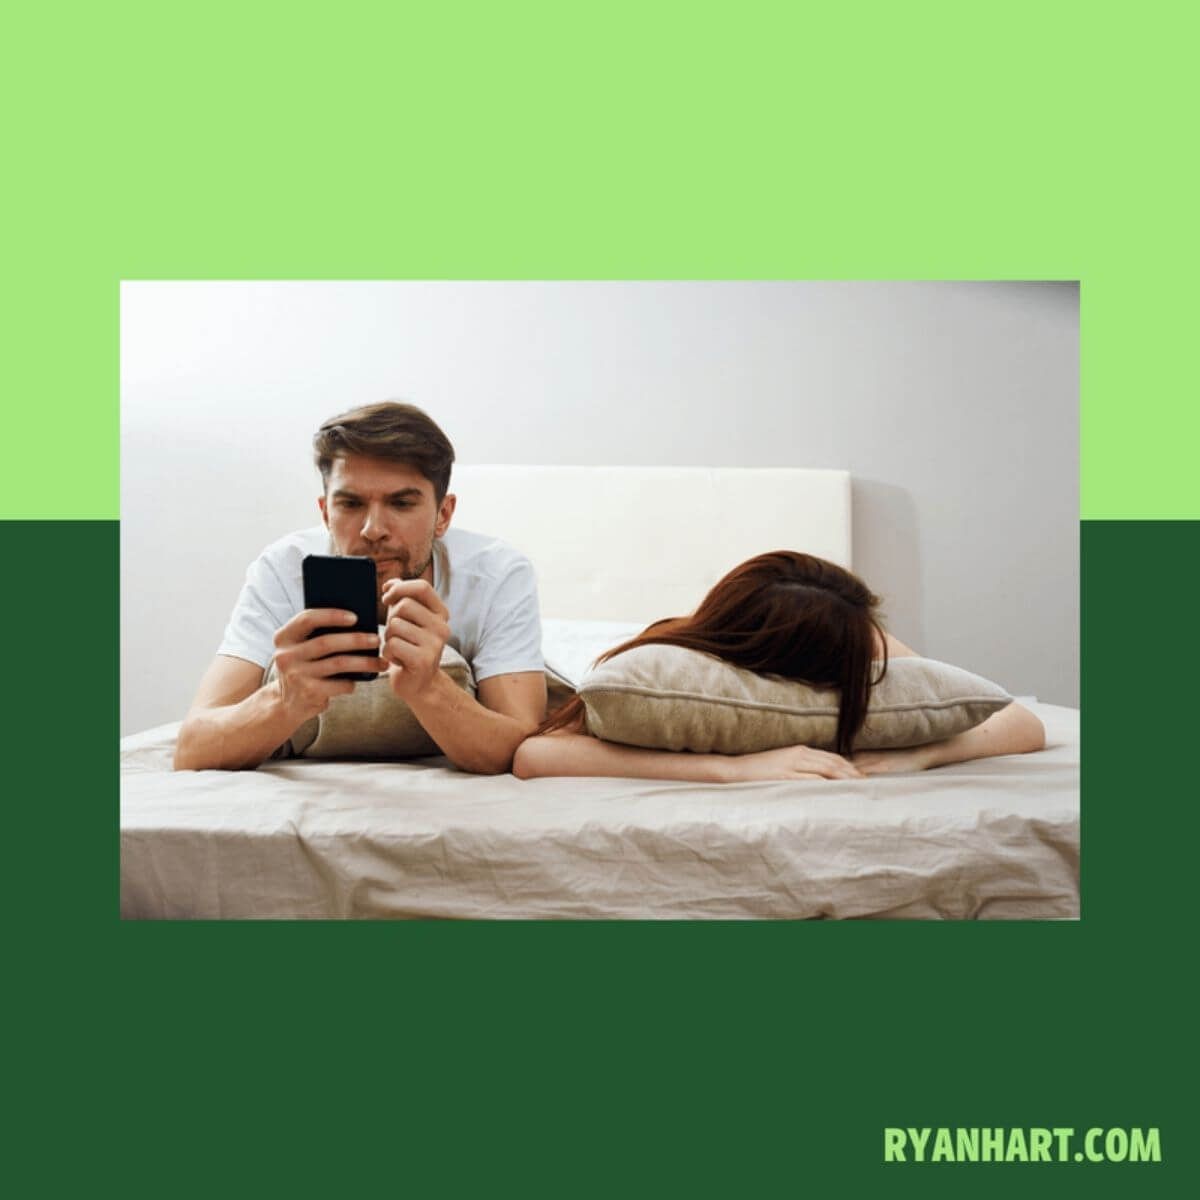 Husband looking at phone in bed